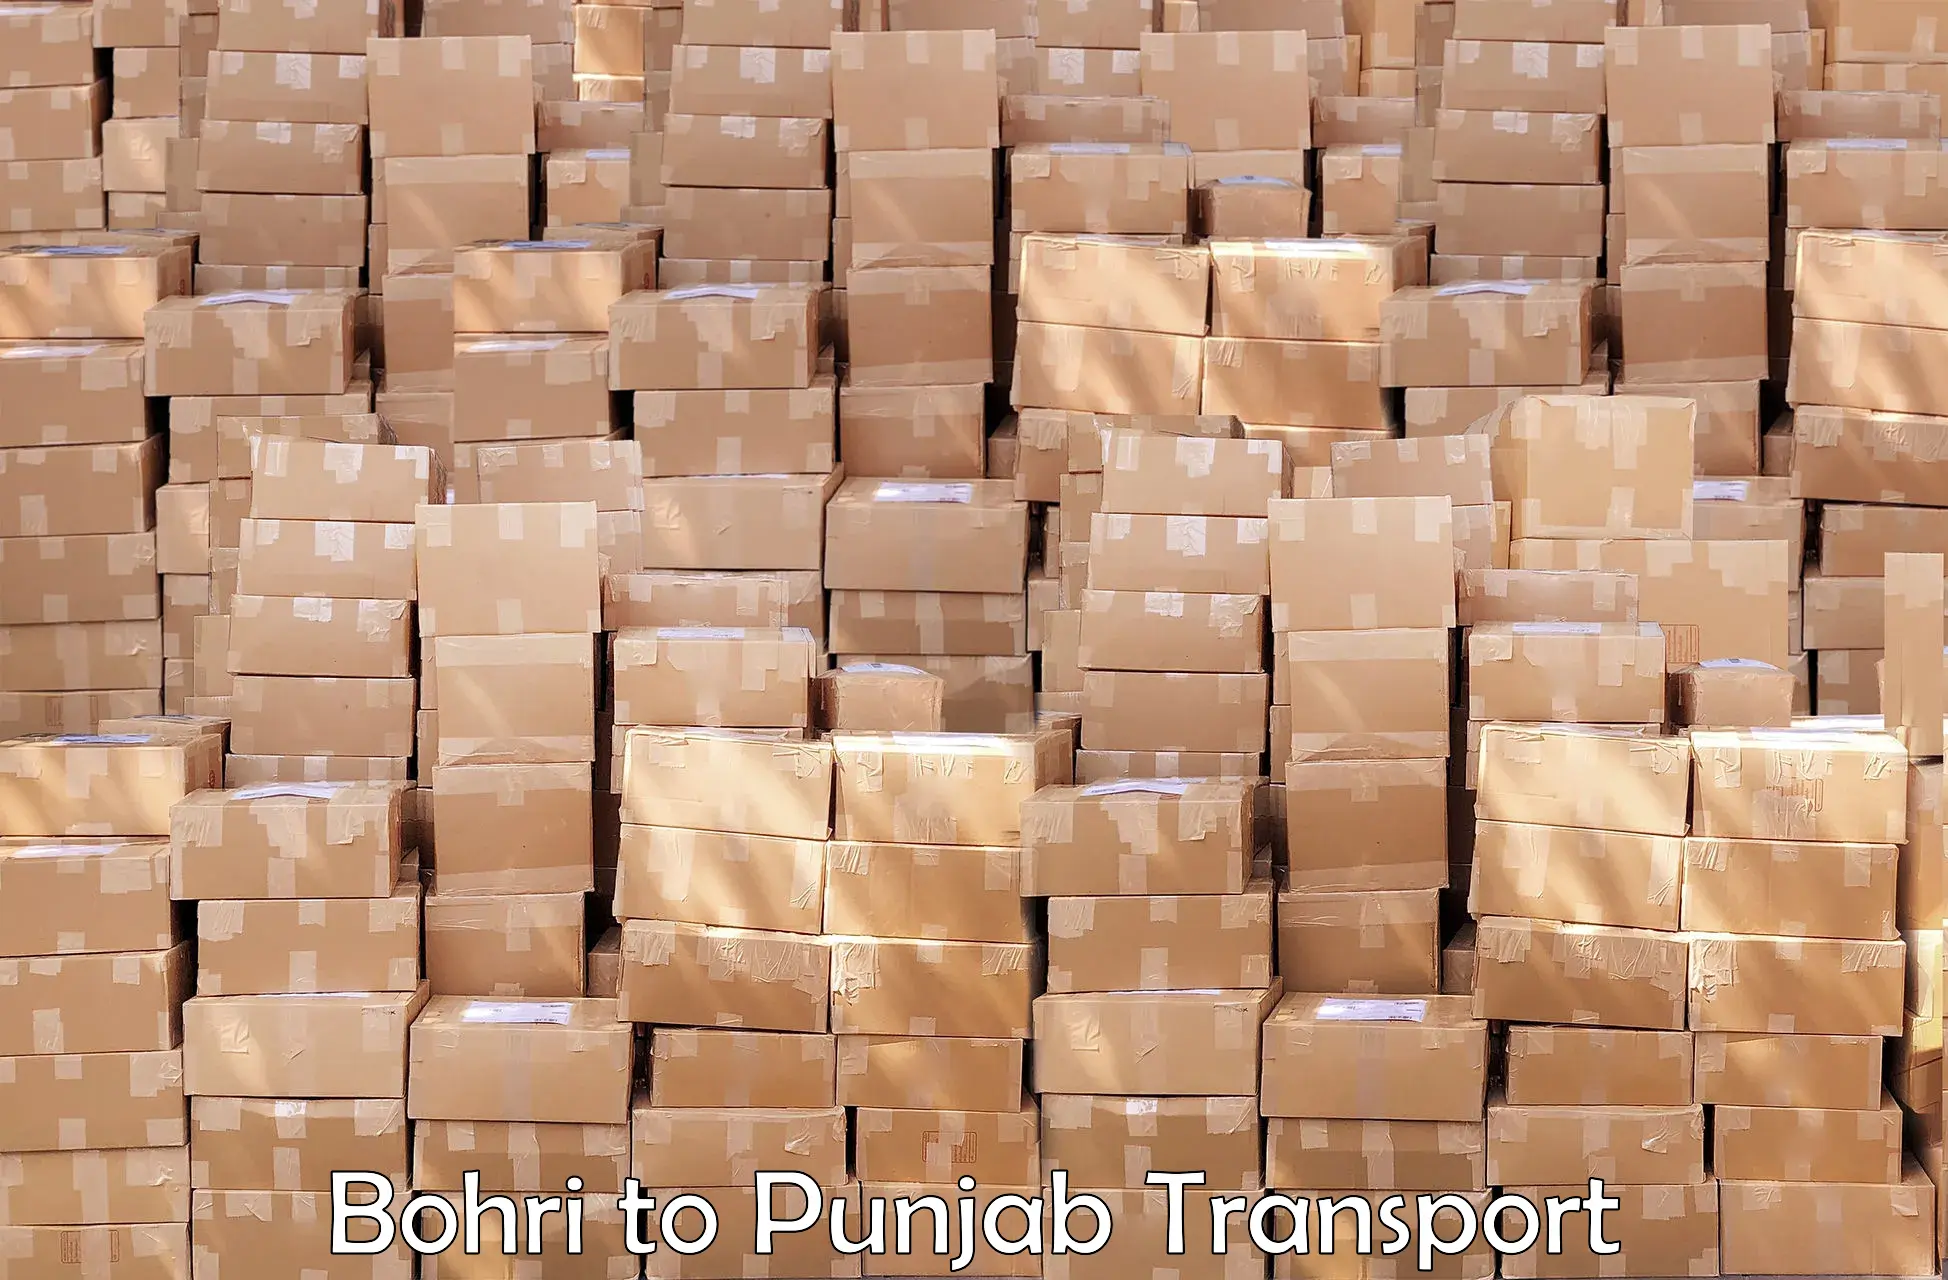 Daily parcel service transport Bohri to Sultanpur Lodhi